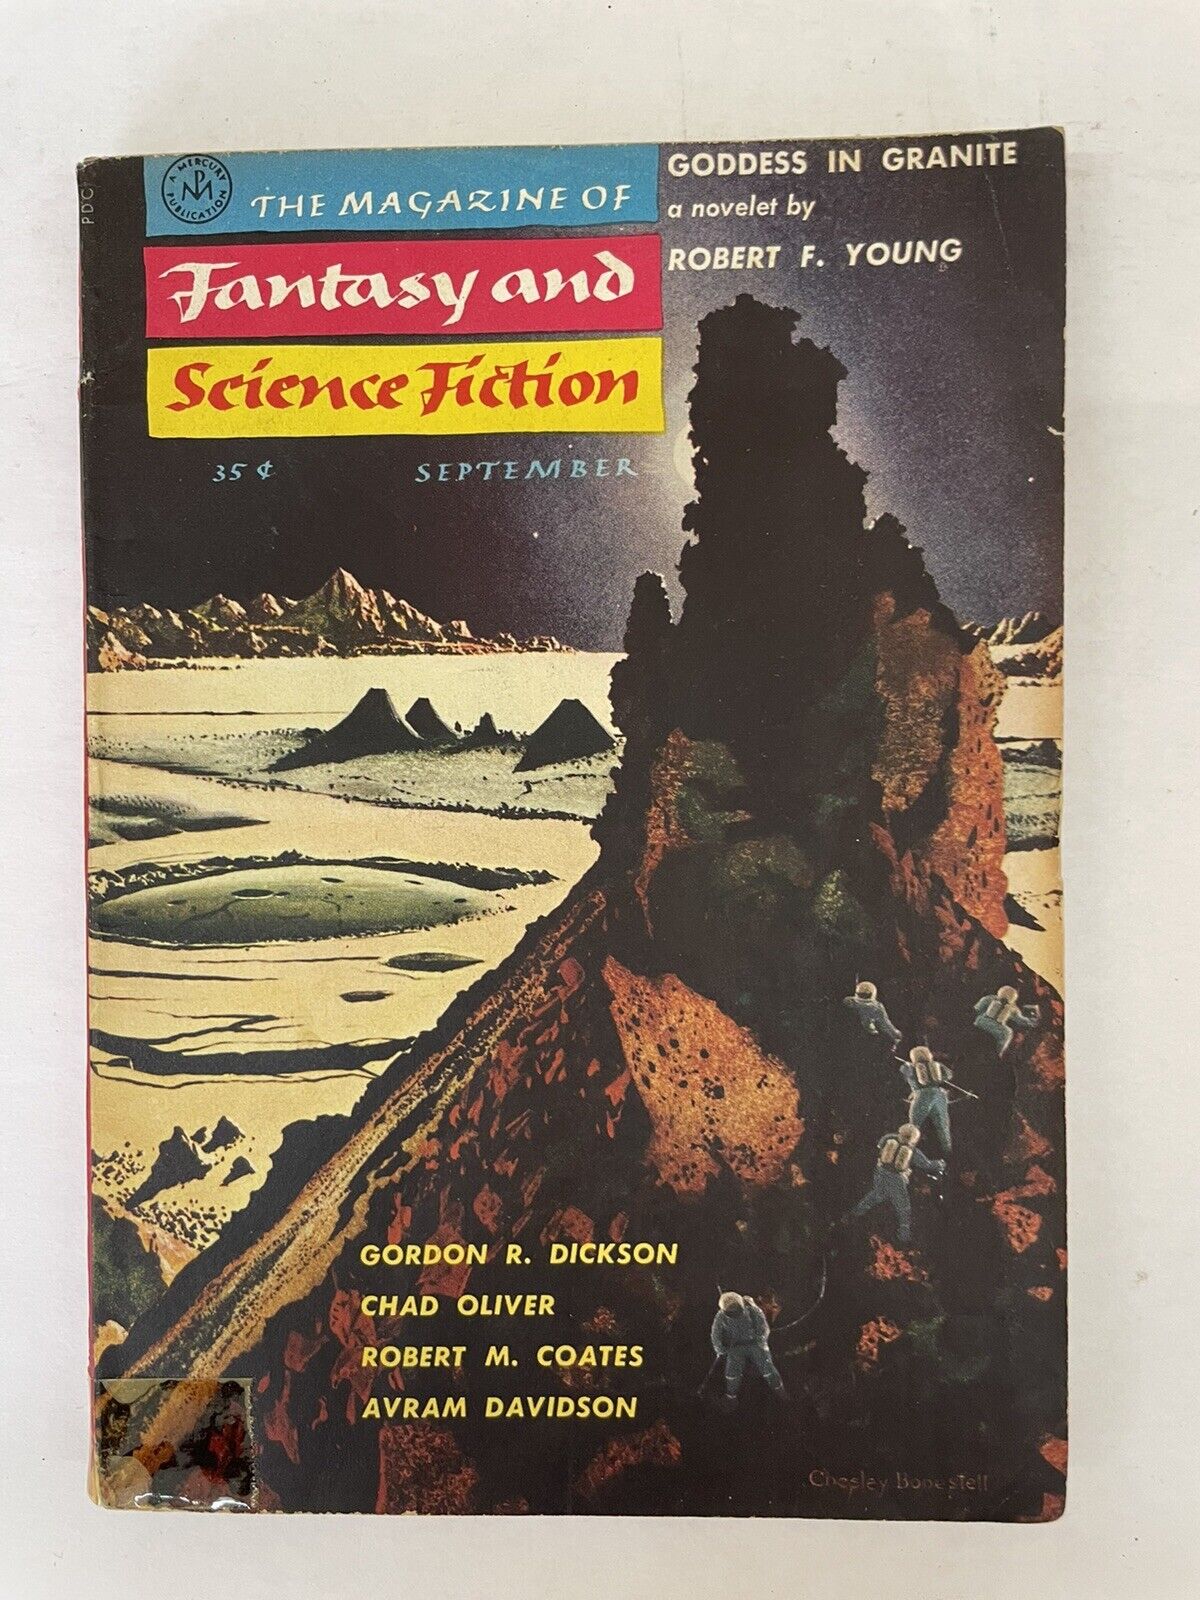 Magazine of Fantasy and Science Fiction Vol. 13 #3 1957